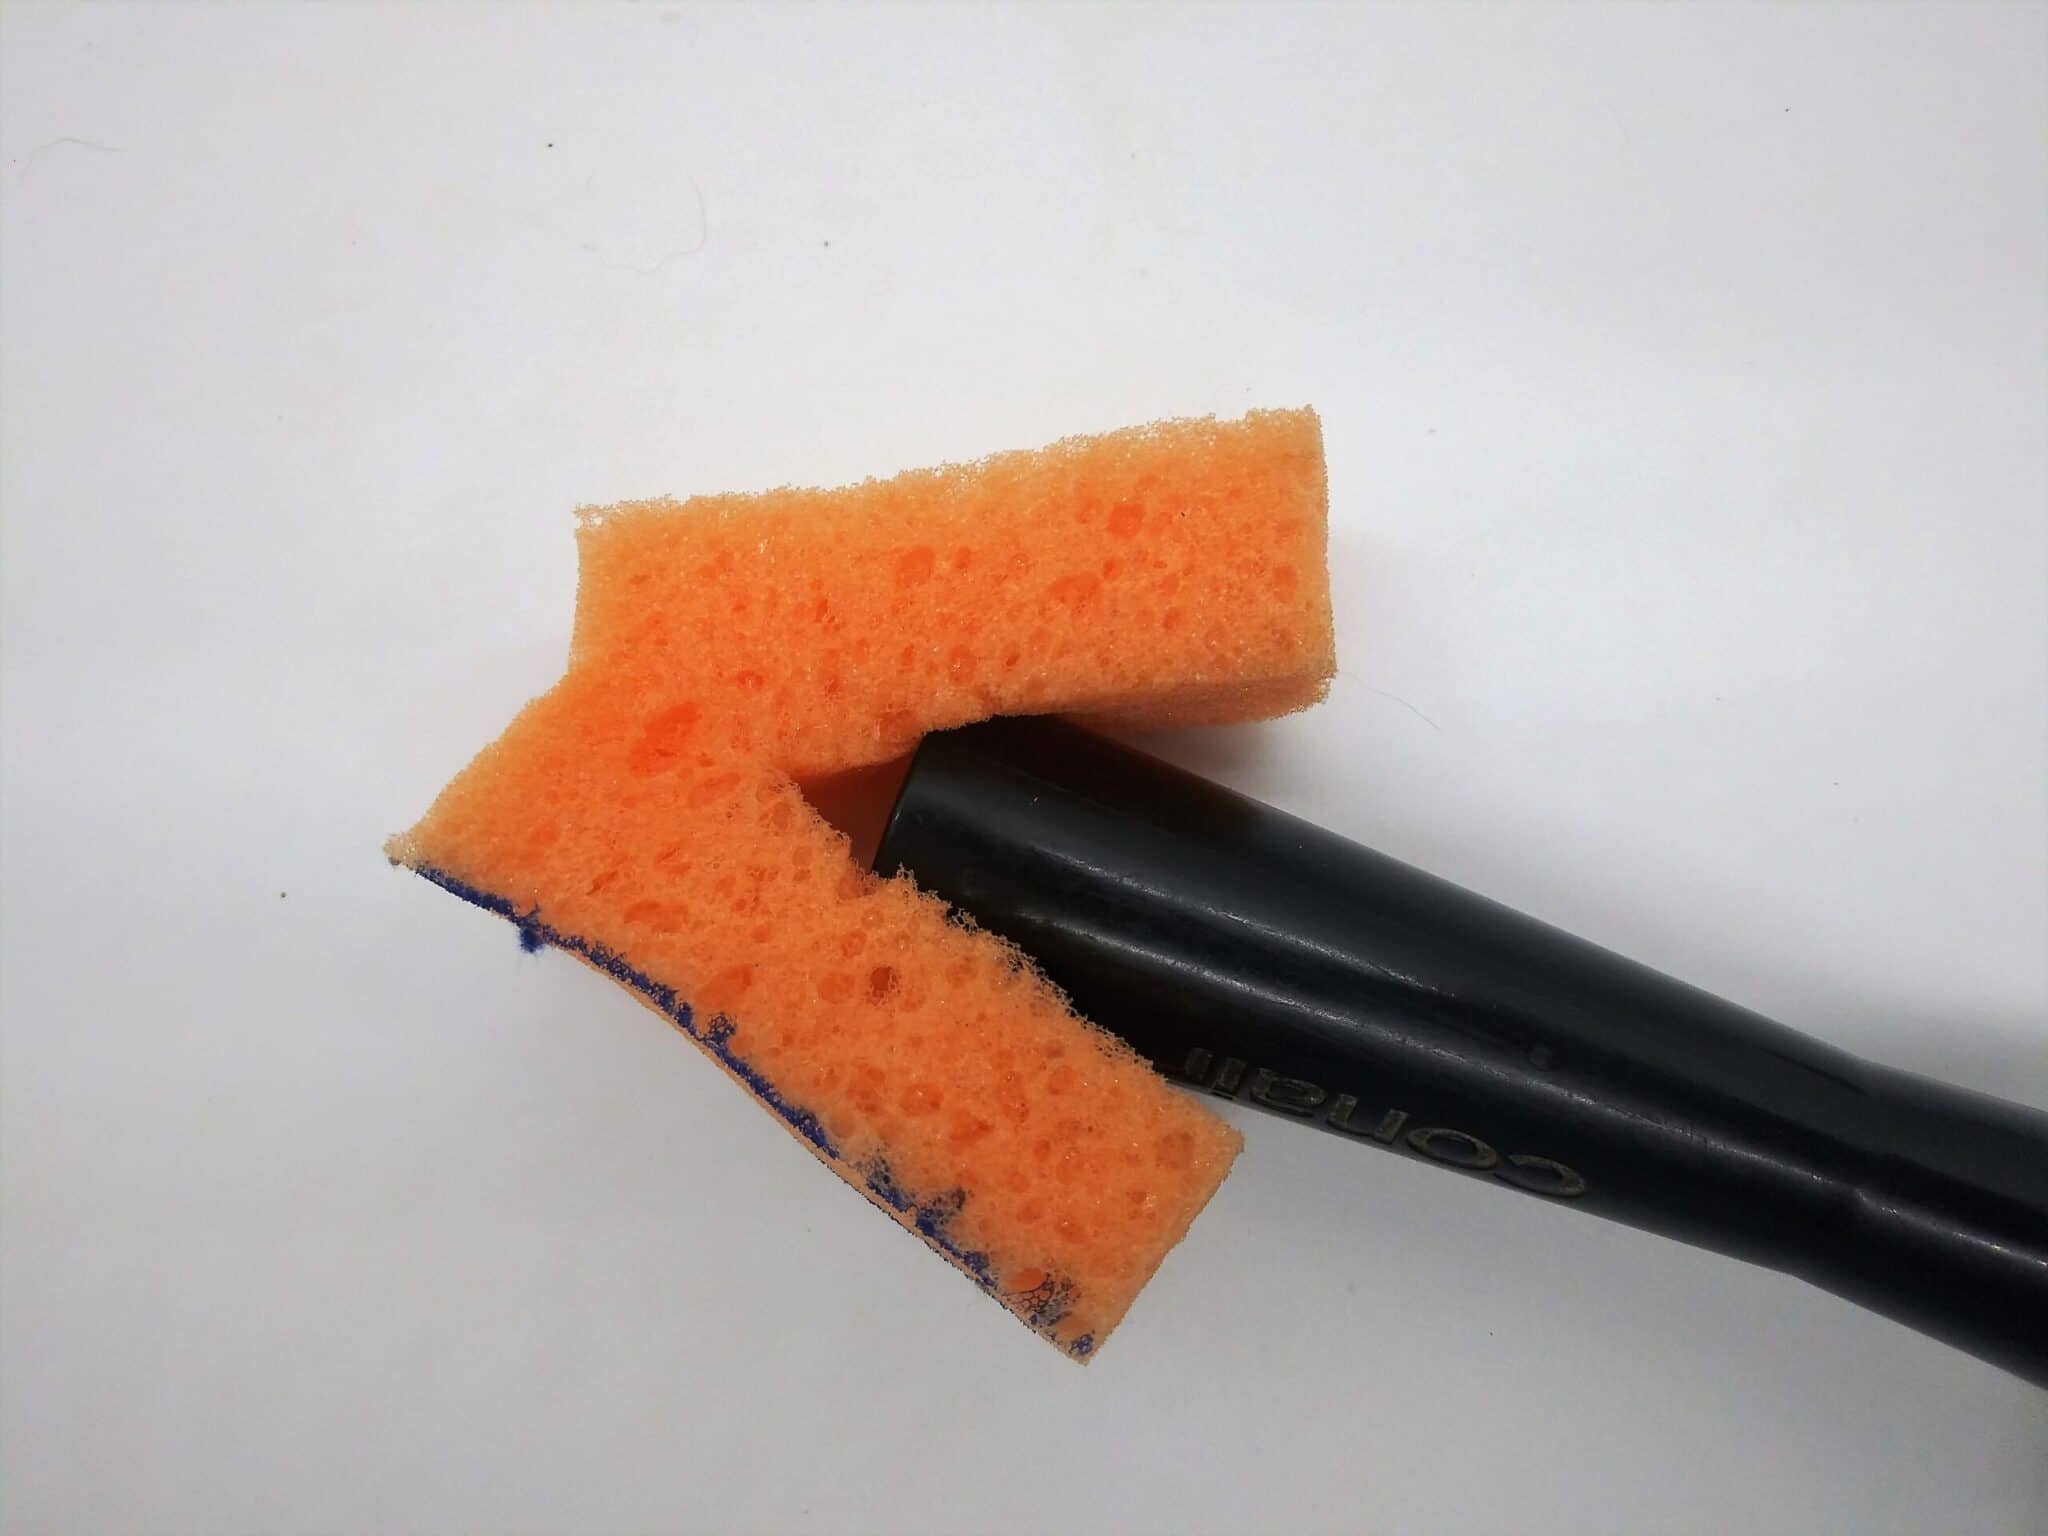 DIY anal sex toy made from a hairbrush ,photo of a small sponge piece being added to the end of the hairbrush handle.